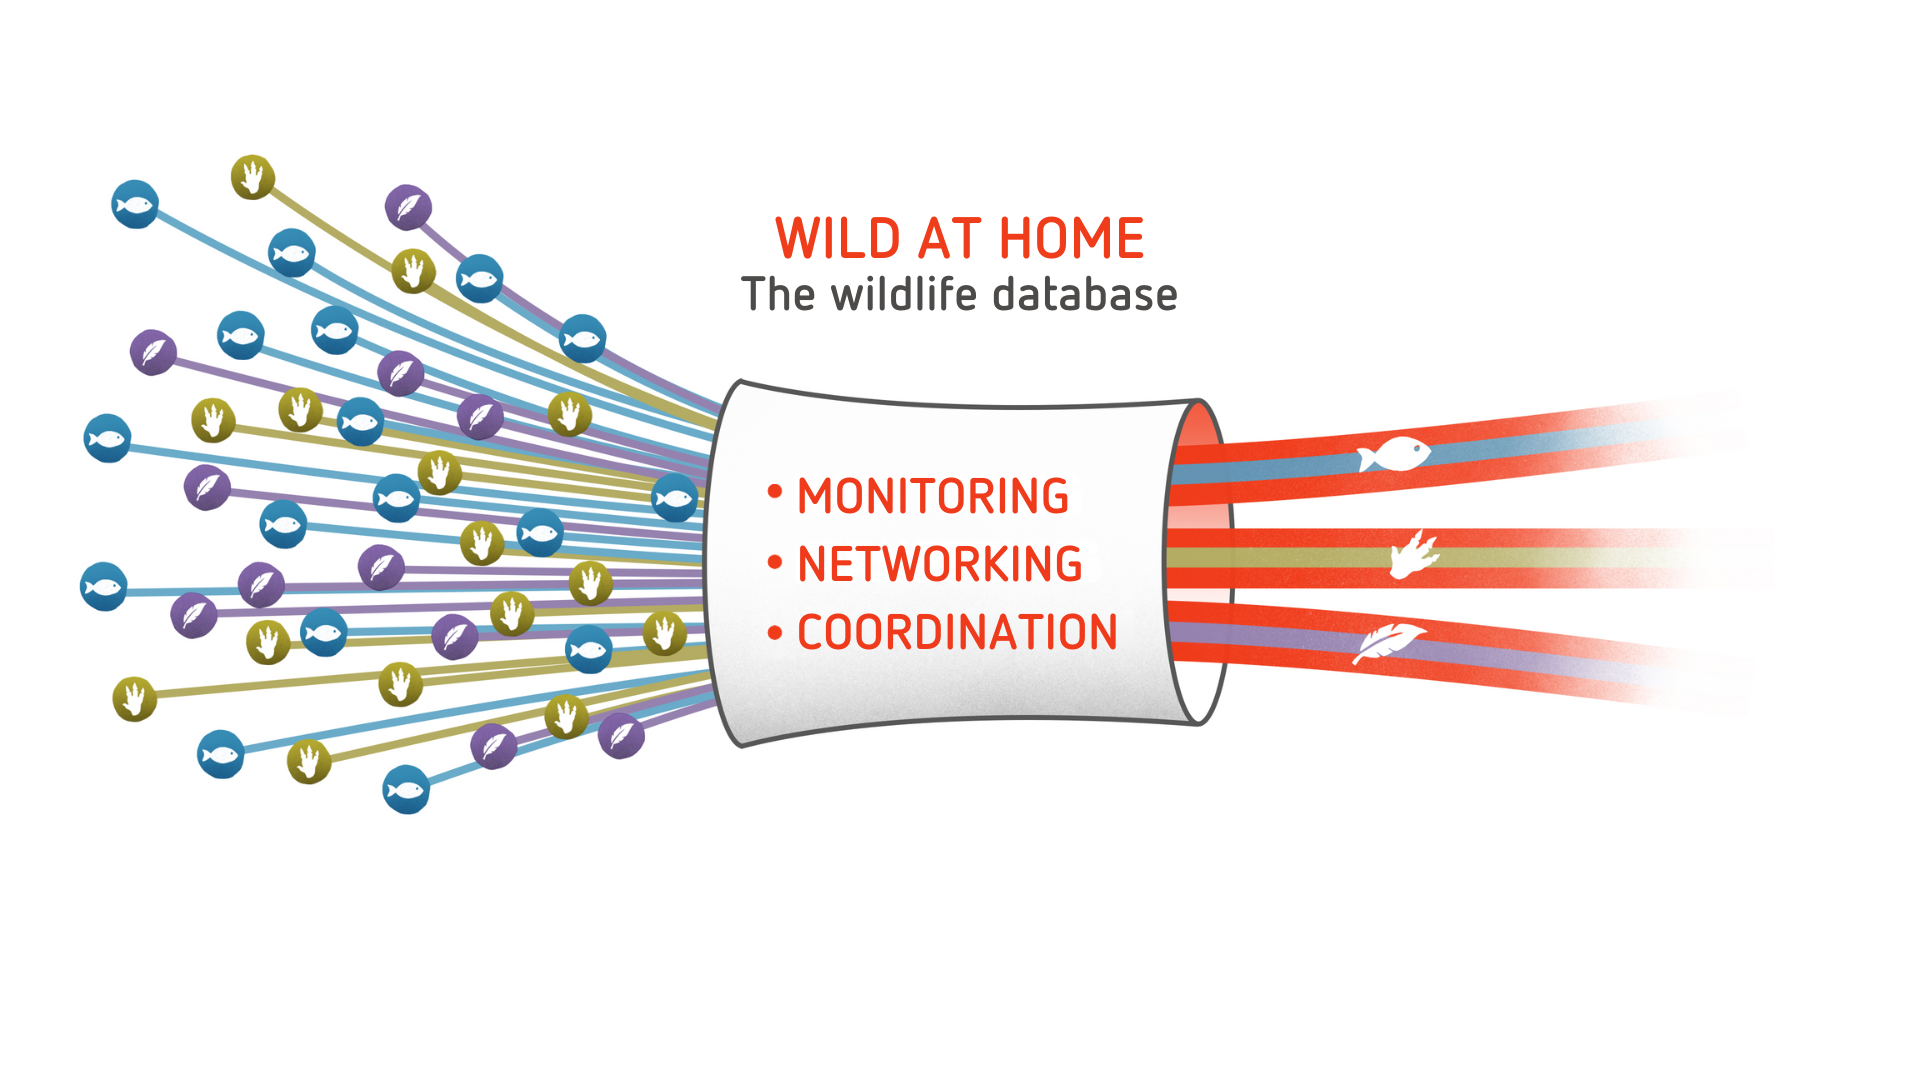 The image shows a graphic of Wild at Home and illustrates that the platform combines the areas of monitoring, networking and coordination.